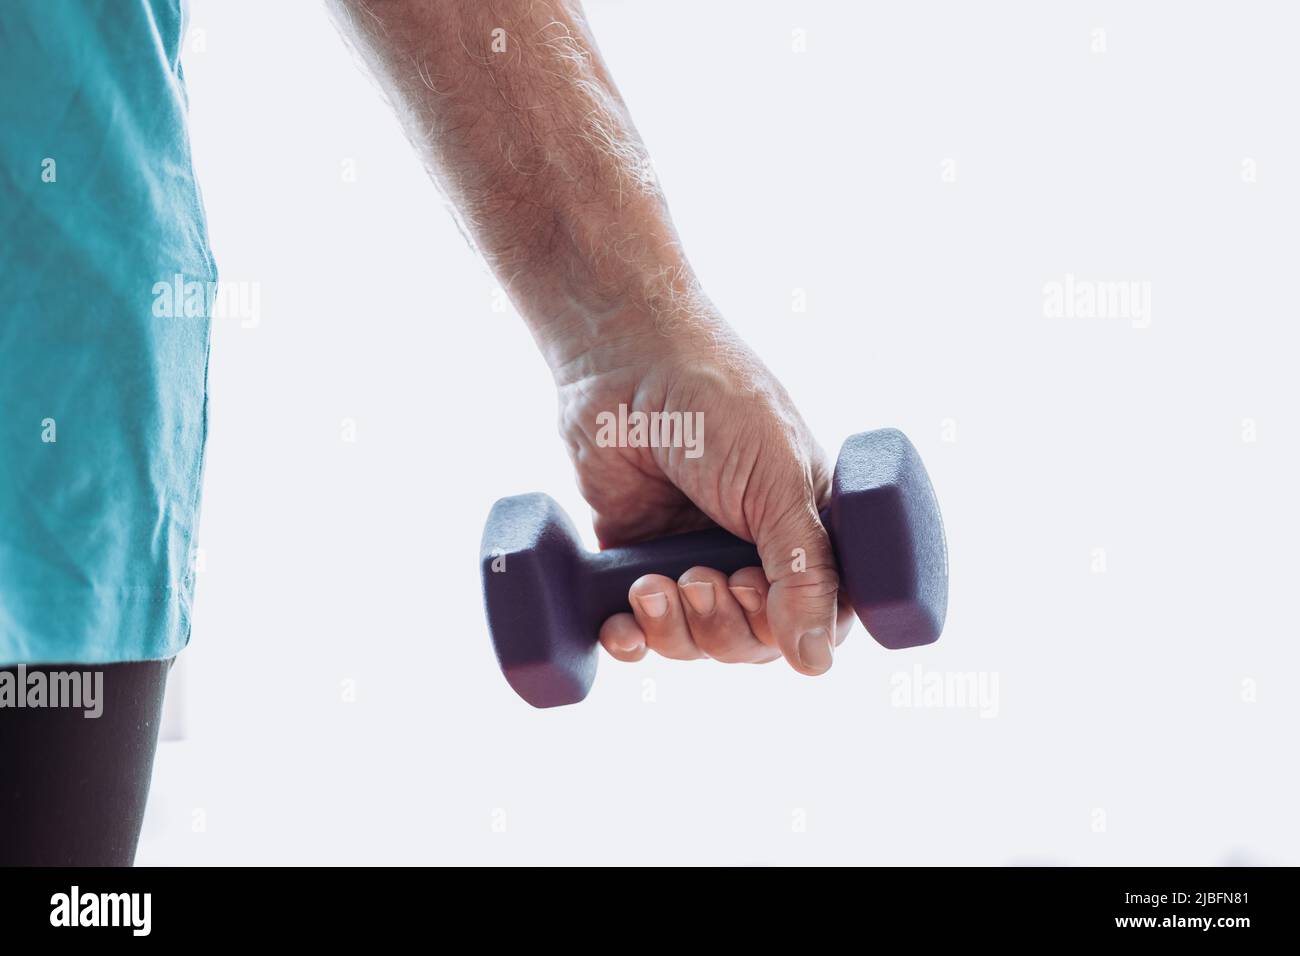 Cropped unrecognizable senior male arm in sportswear doing exercise with dumbbells during fitness workout in morning at home Stock Photo